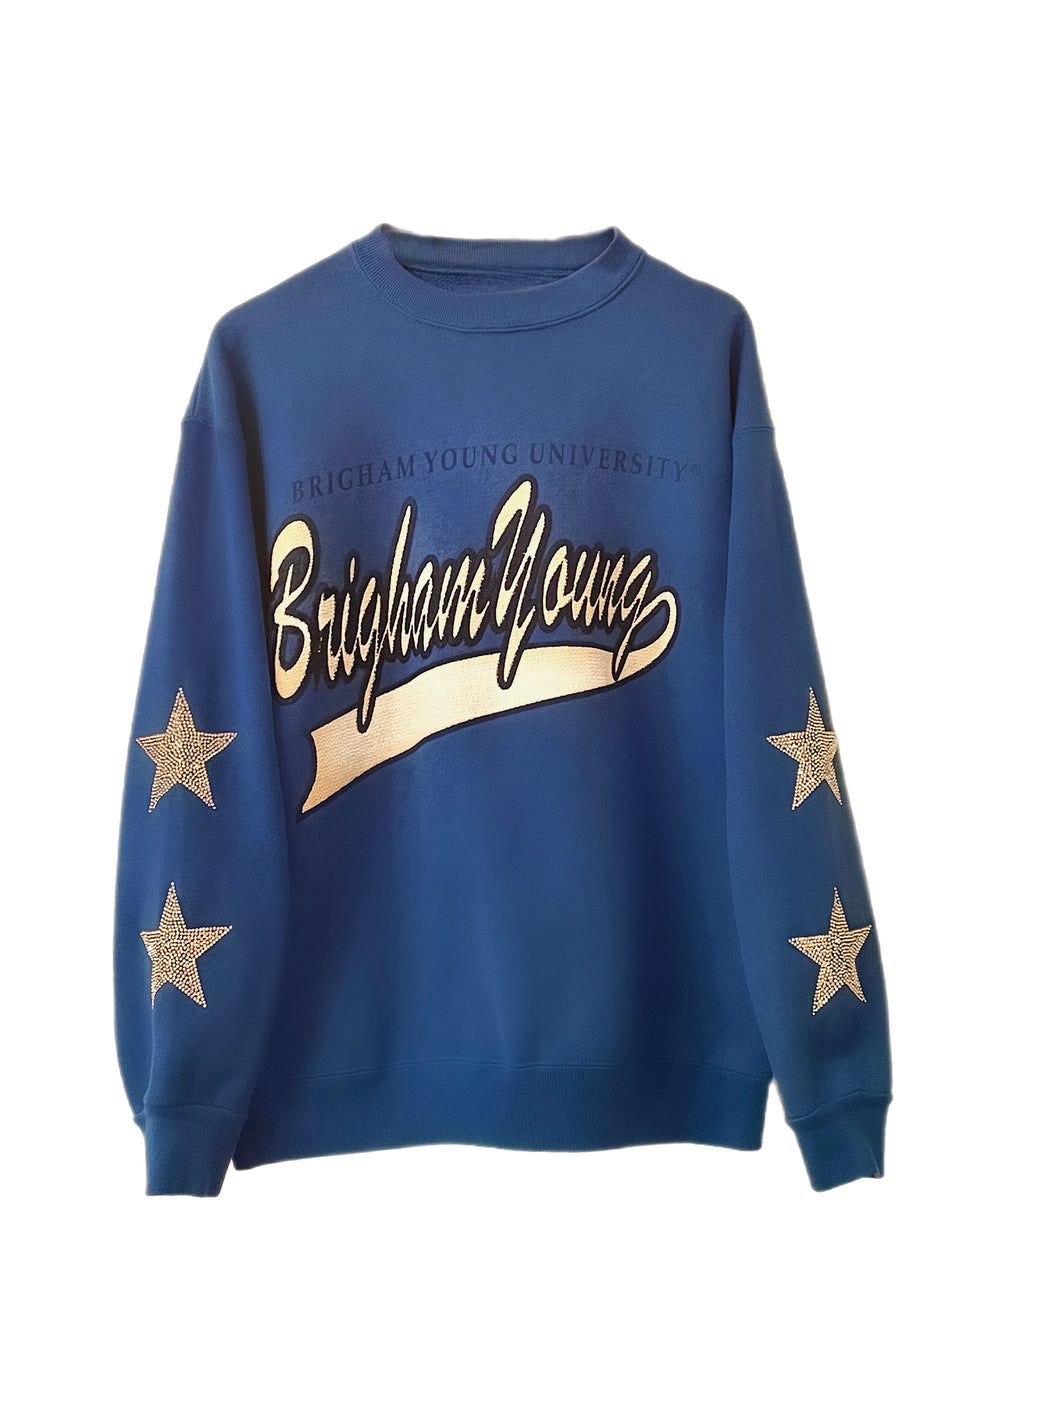 Brigham Young University, One of a KIND Vintage BYU Cougars Sweatshirt with Crystal Star Design.